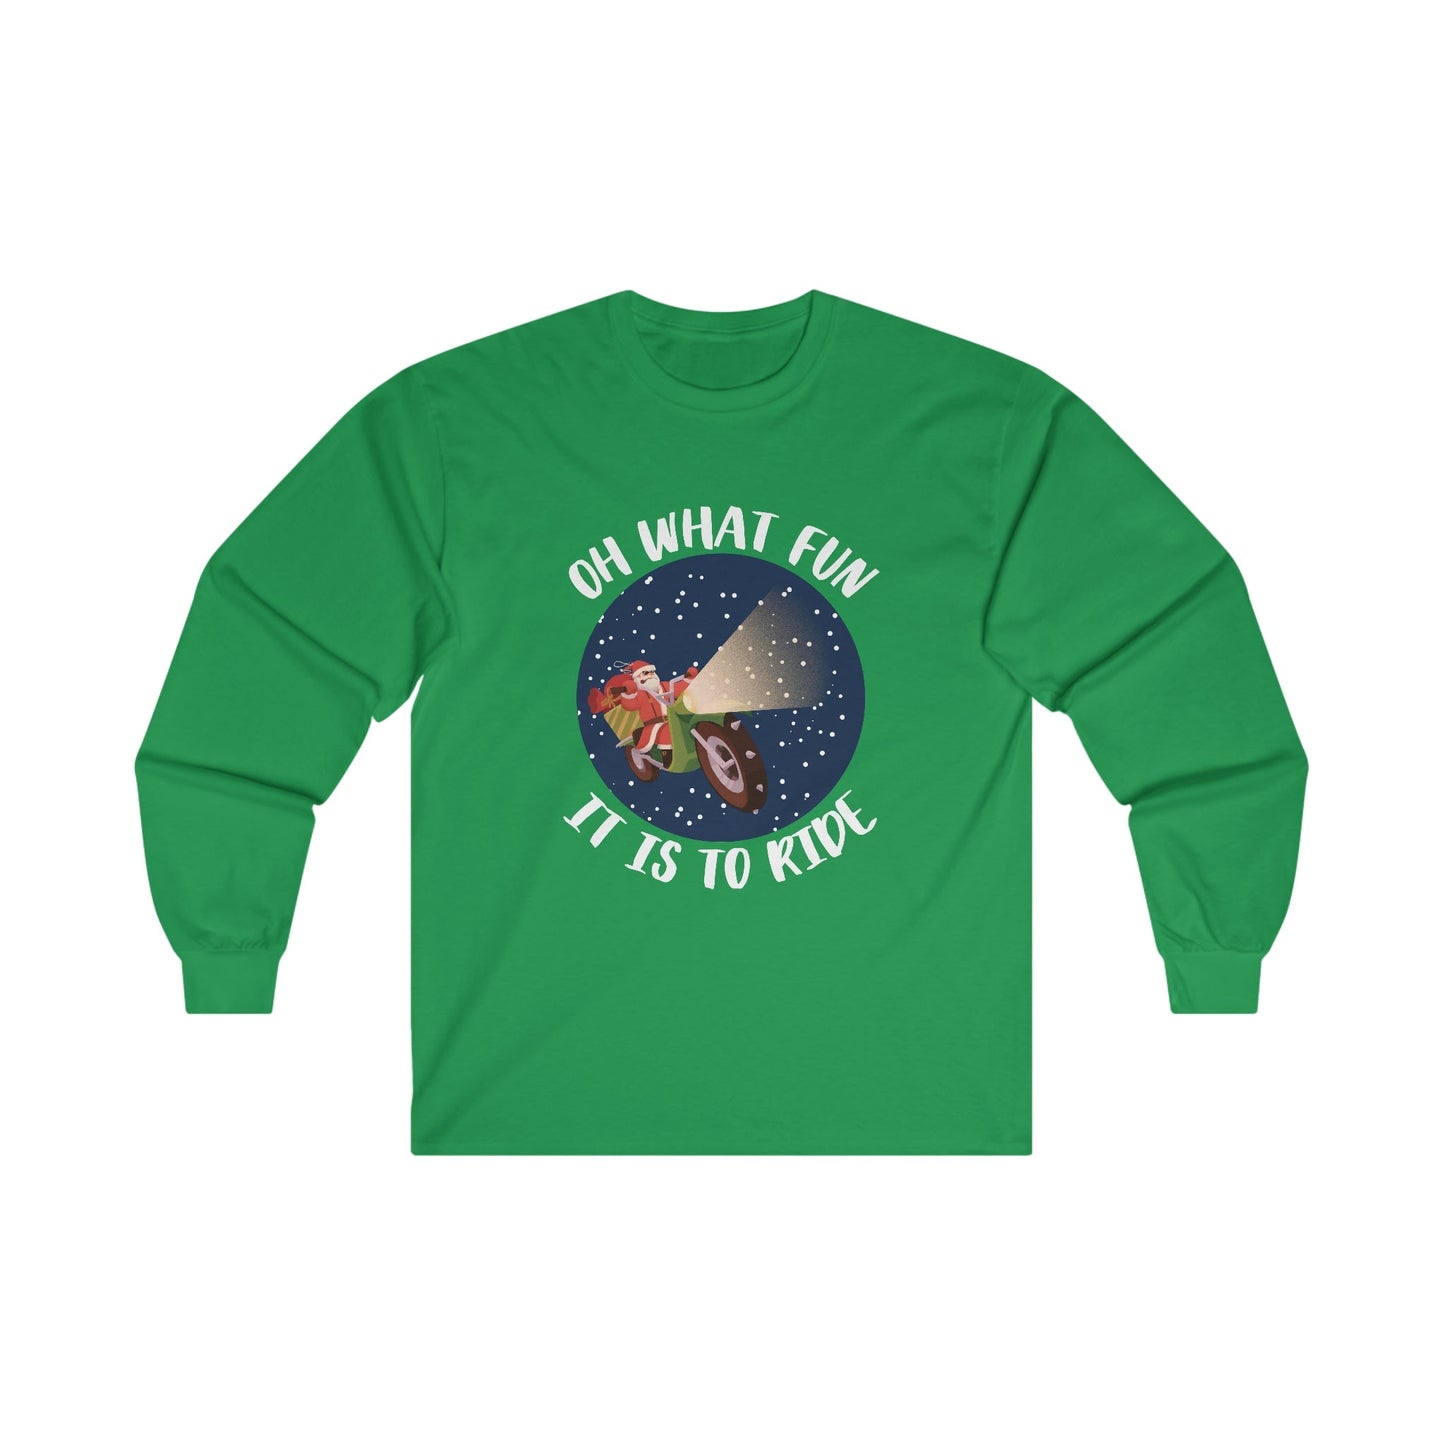 Christmas Long Sleeve T-Shirt - Oh What Fun It Is To Ride - Mens and Boys Christmas Shirts - Youth and Adult Christmas Long Sleeve TShirts Long Sleeve T-Shirts Graphic Avenue Irish Green Adult Small 